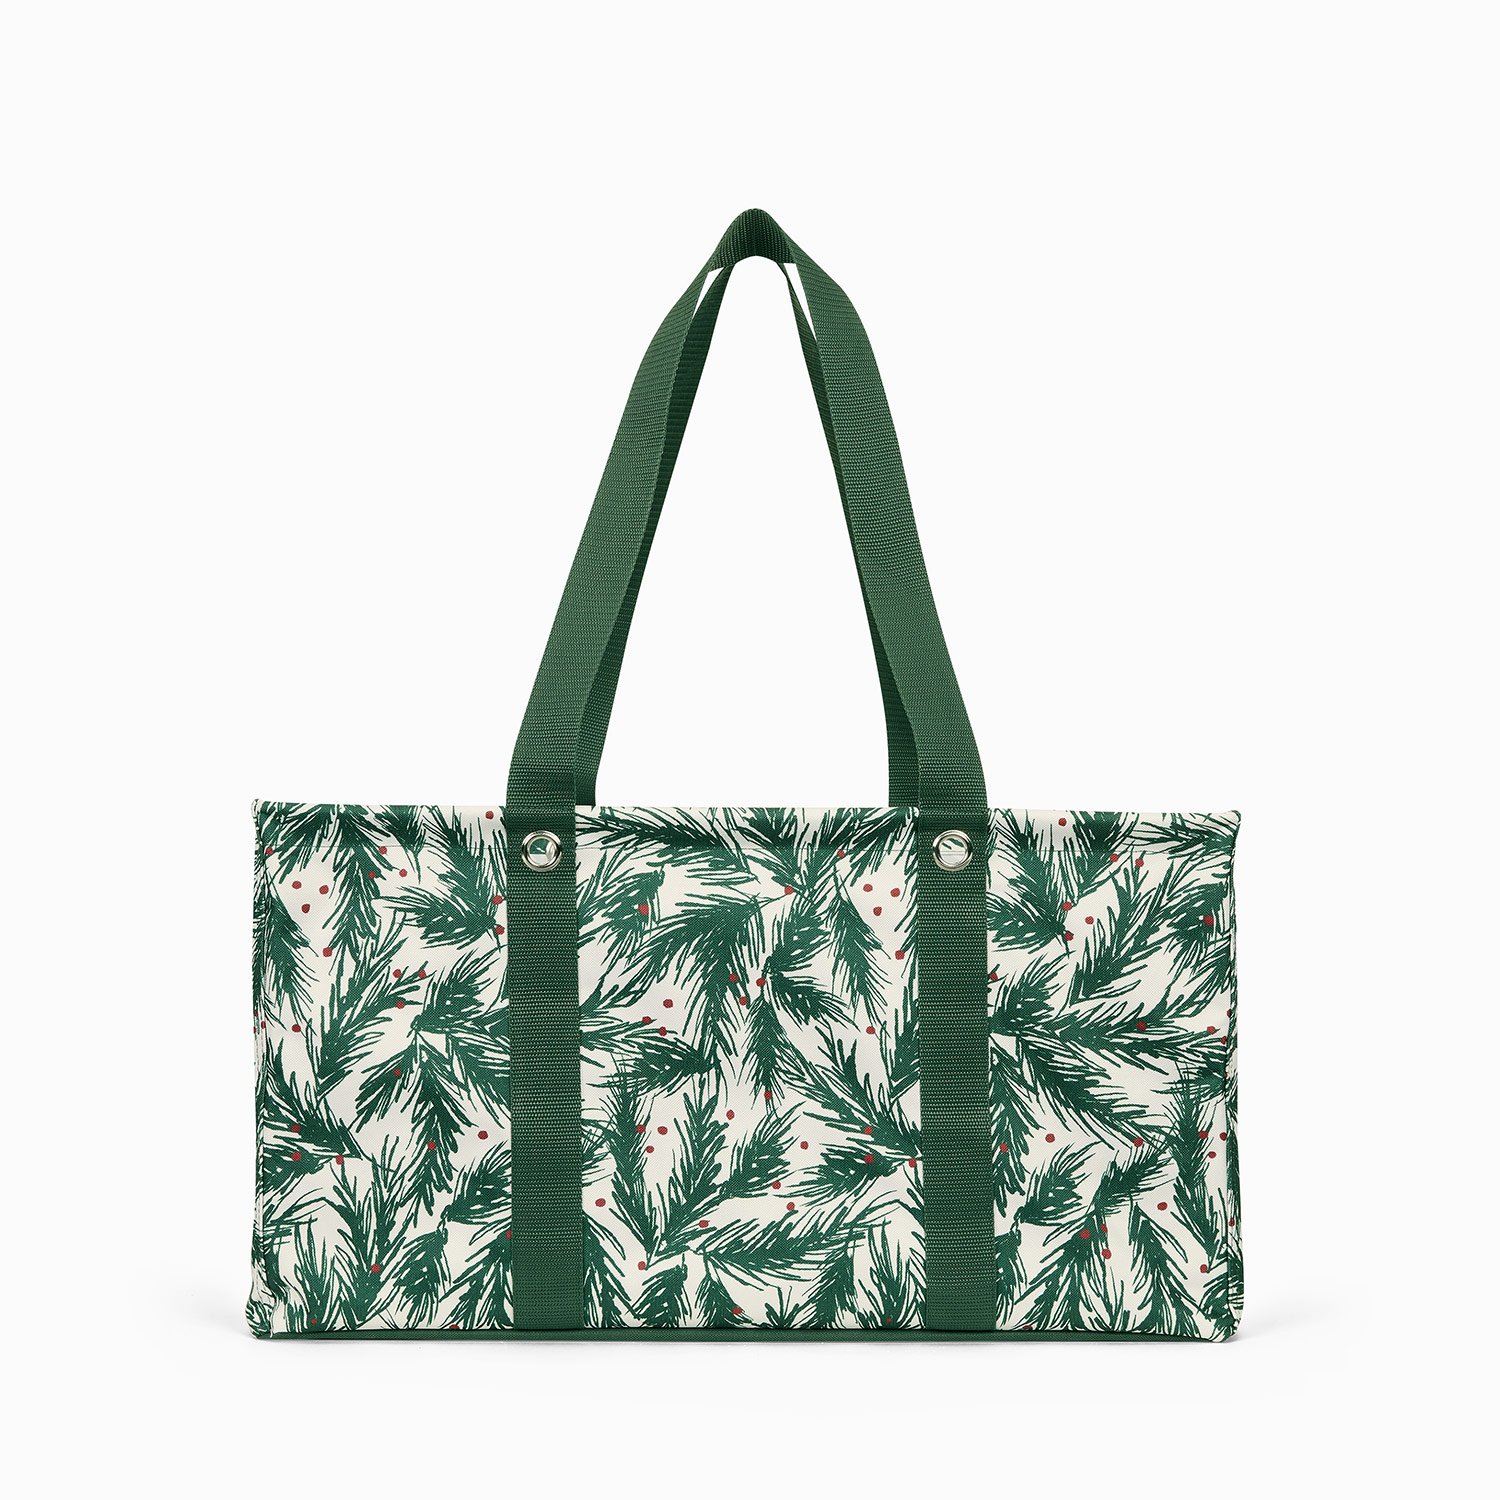 Large Utility Tote Uses - Parties by Rosemary